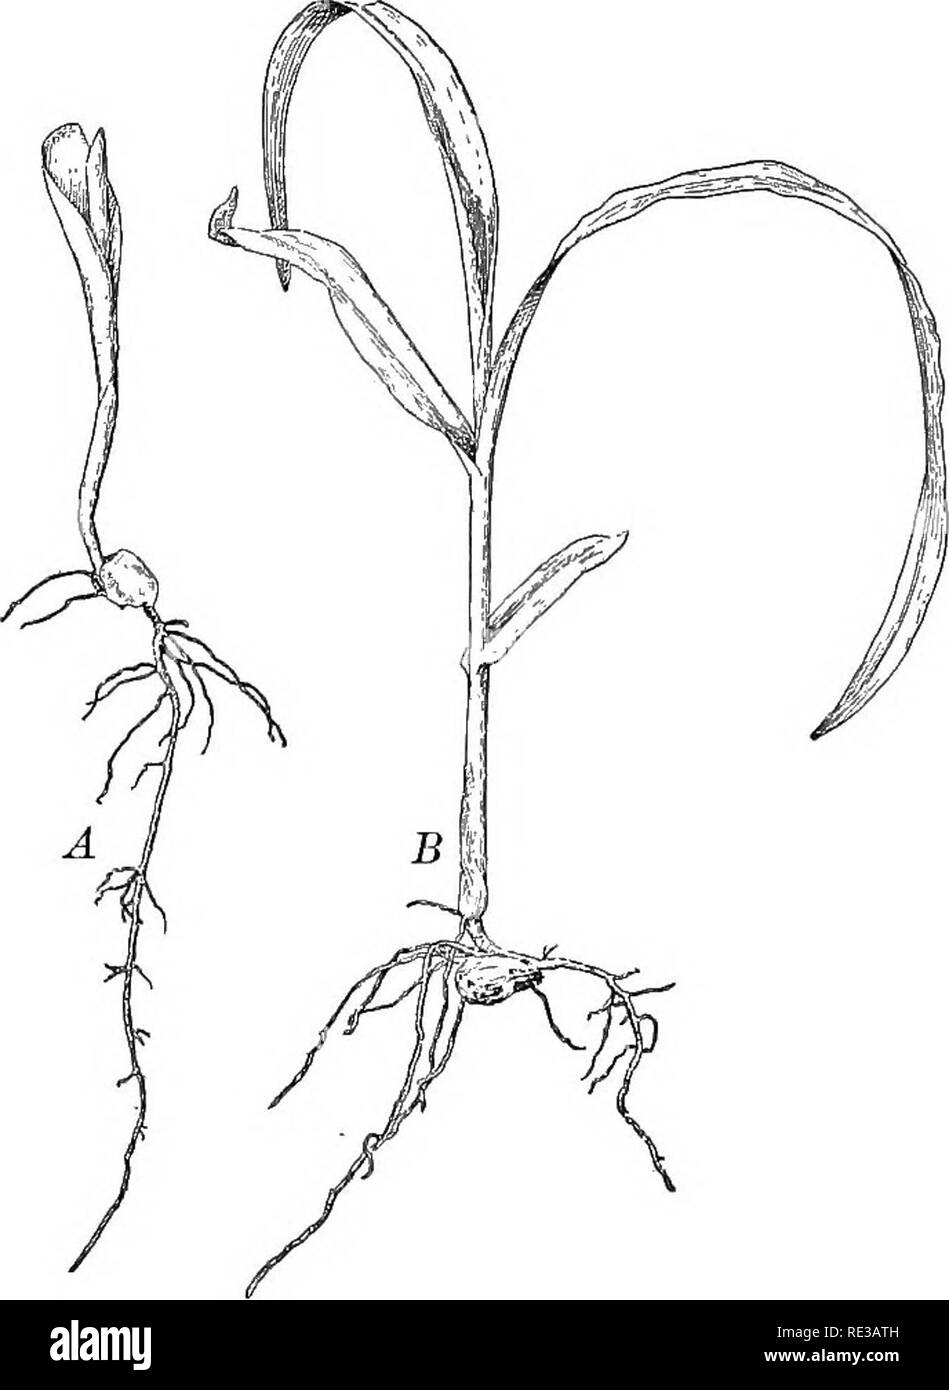 Introduction to botany. Botany. Pig. 13. Seedlings of the sunflower plant  A, old seed coat still partly inclosing the seed leaves; B, seed leaves  open and first true leaves appearing. Fig.